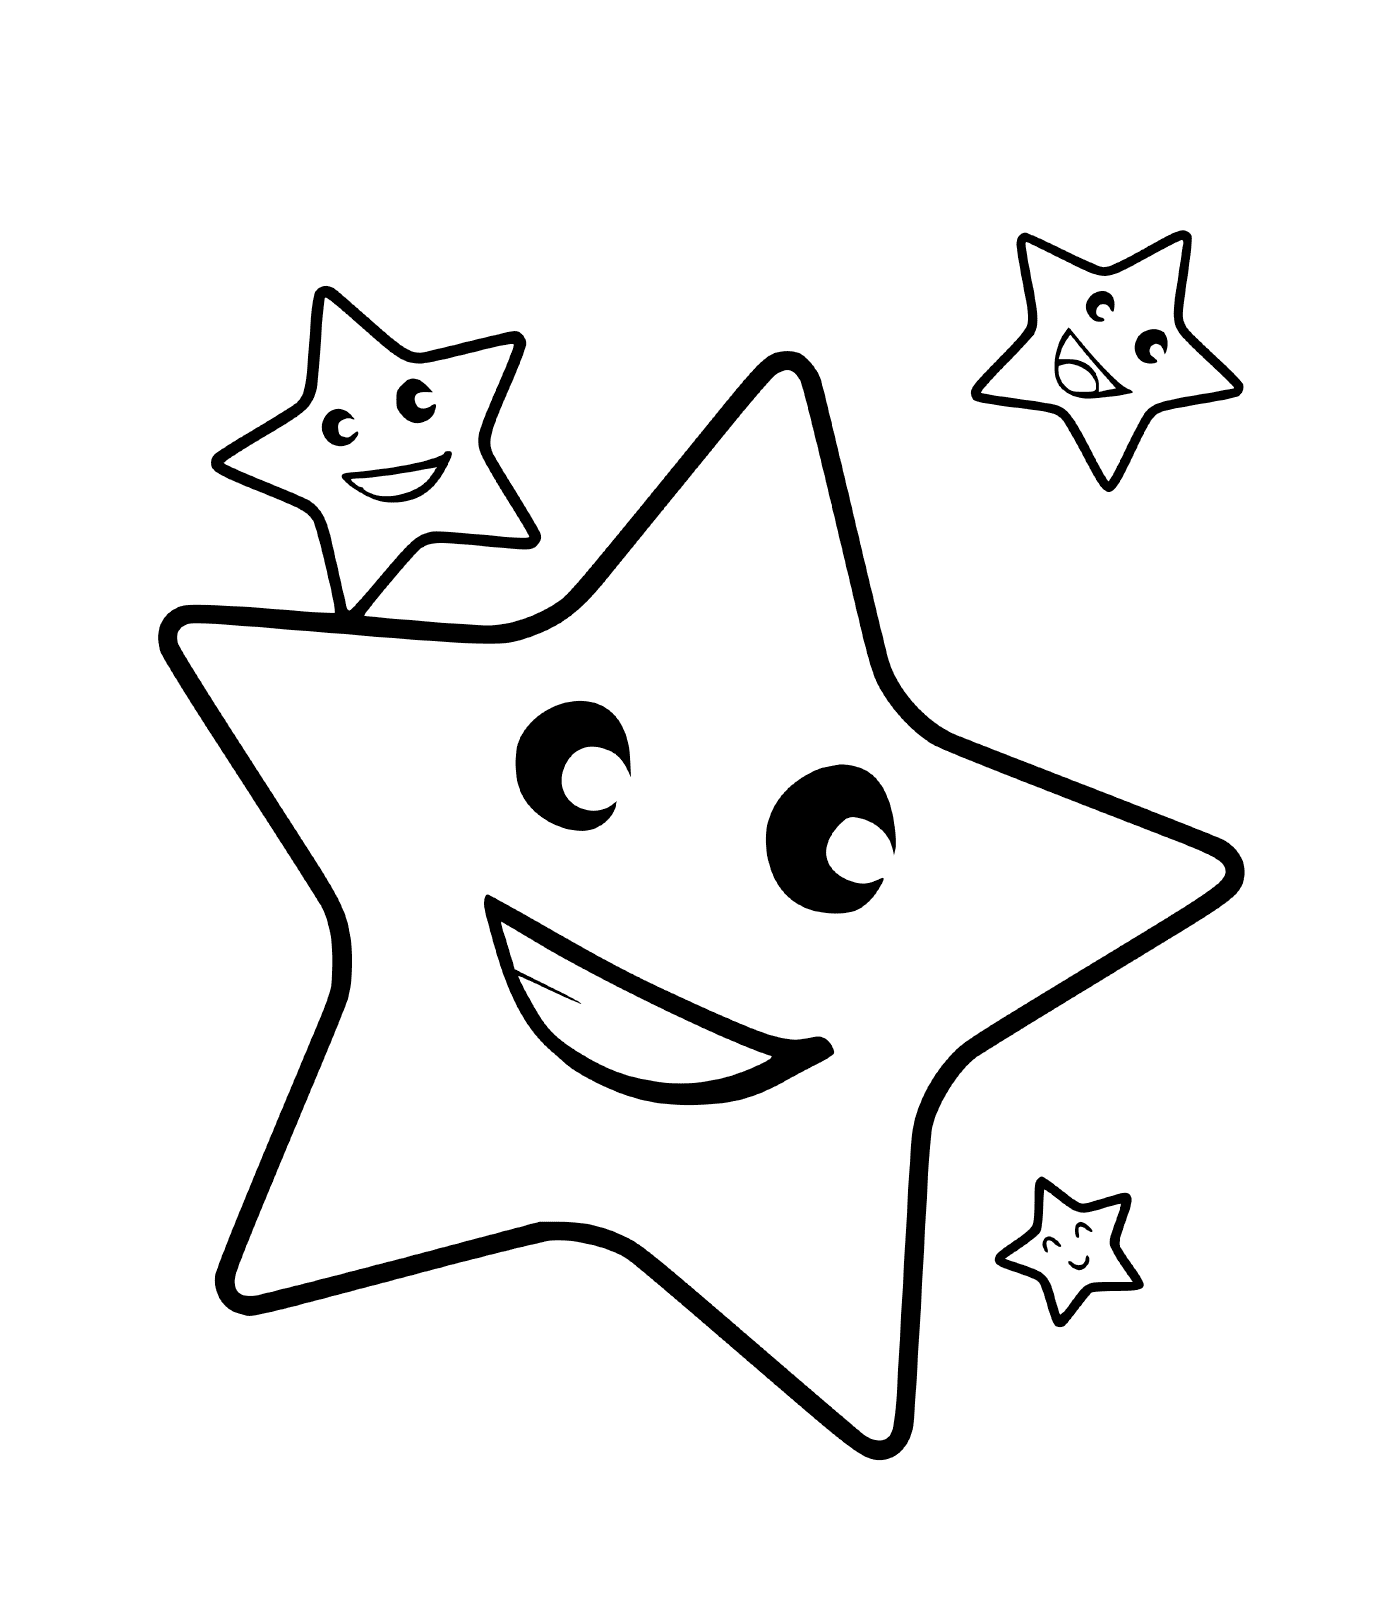  A star with three smiling faces 